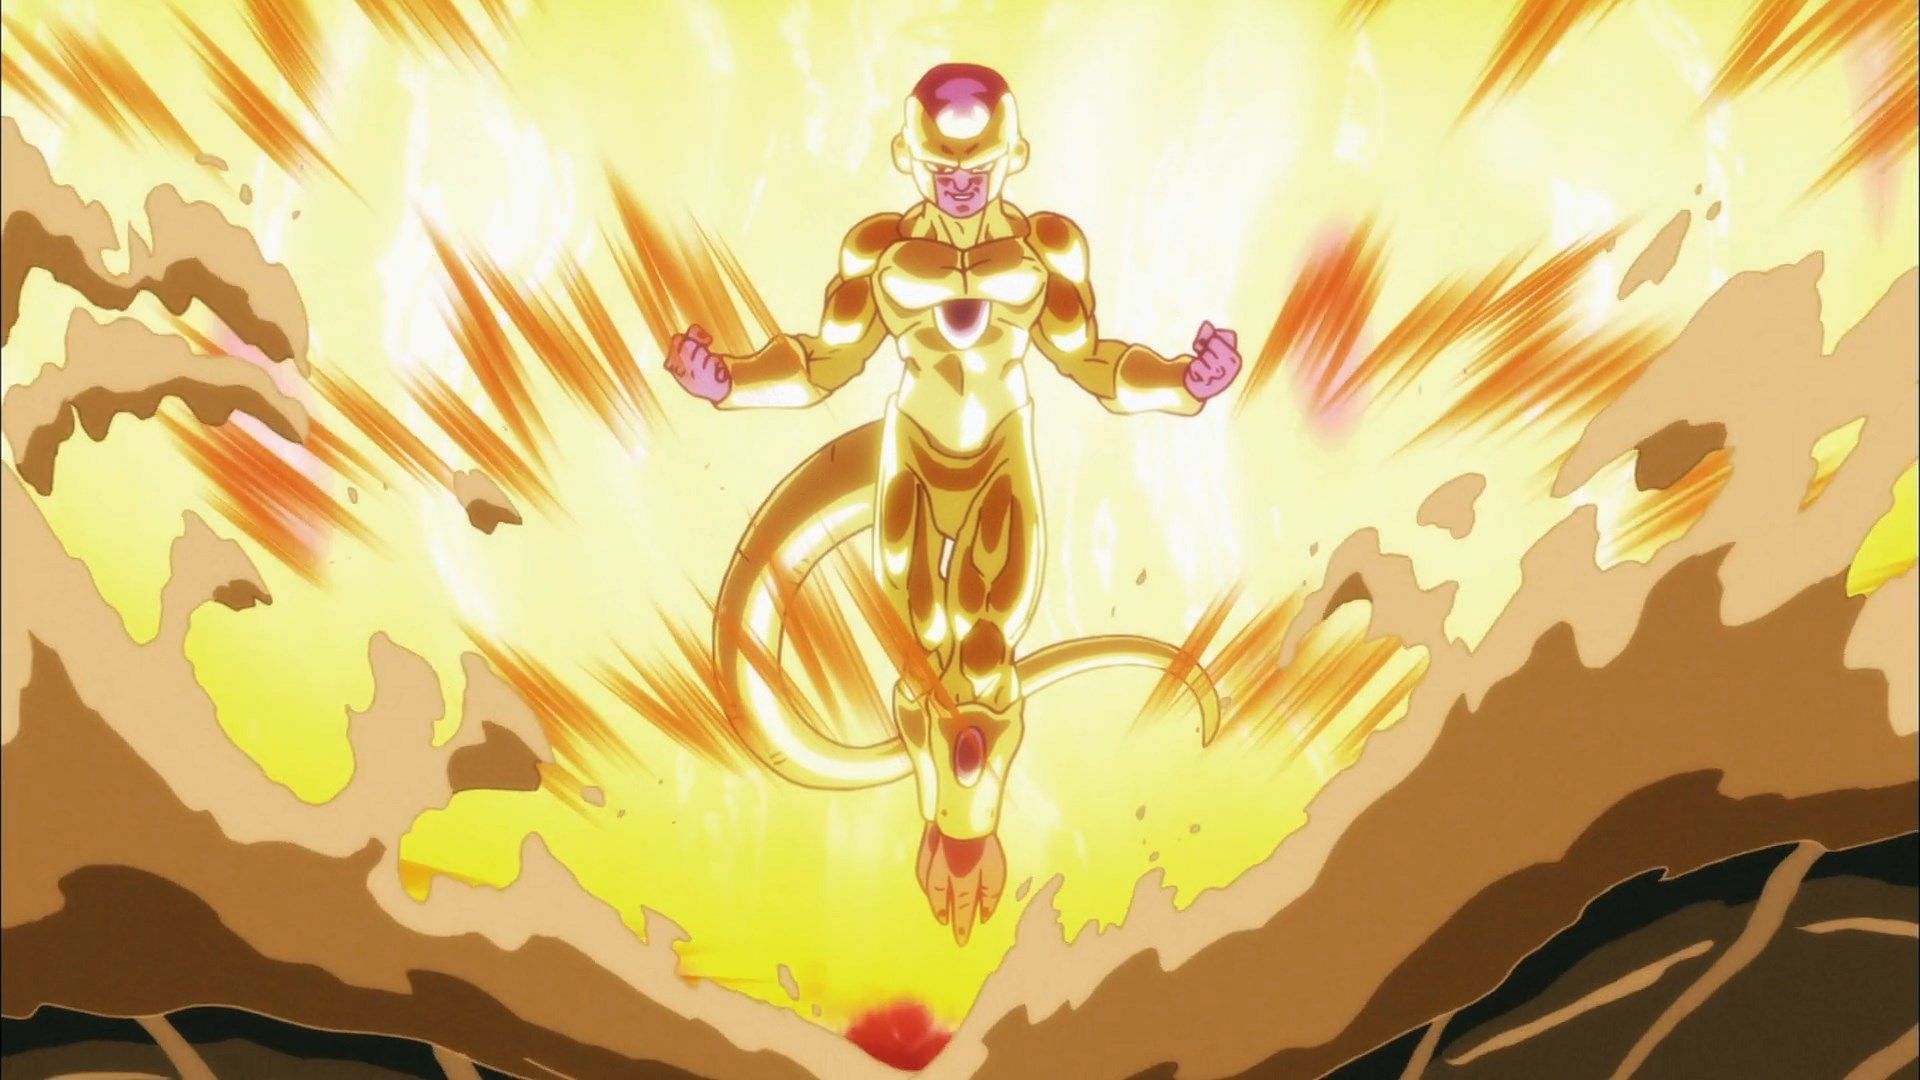 Golden Frieza powers up as seen in the Dragon Ball Super anime. (Image via Toei Animation)